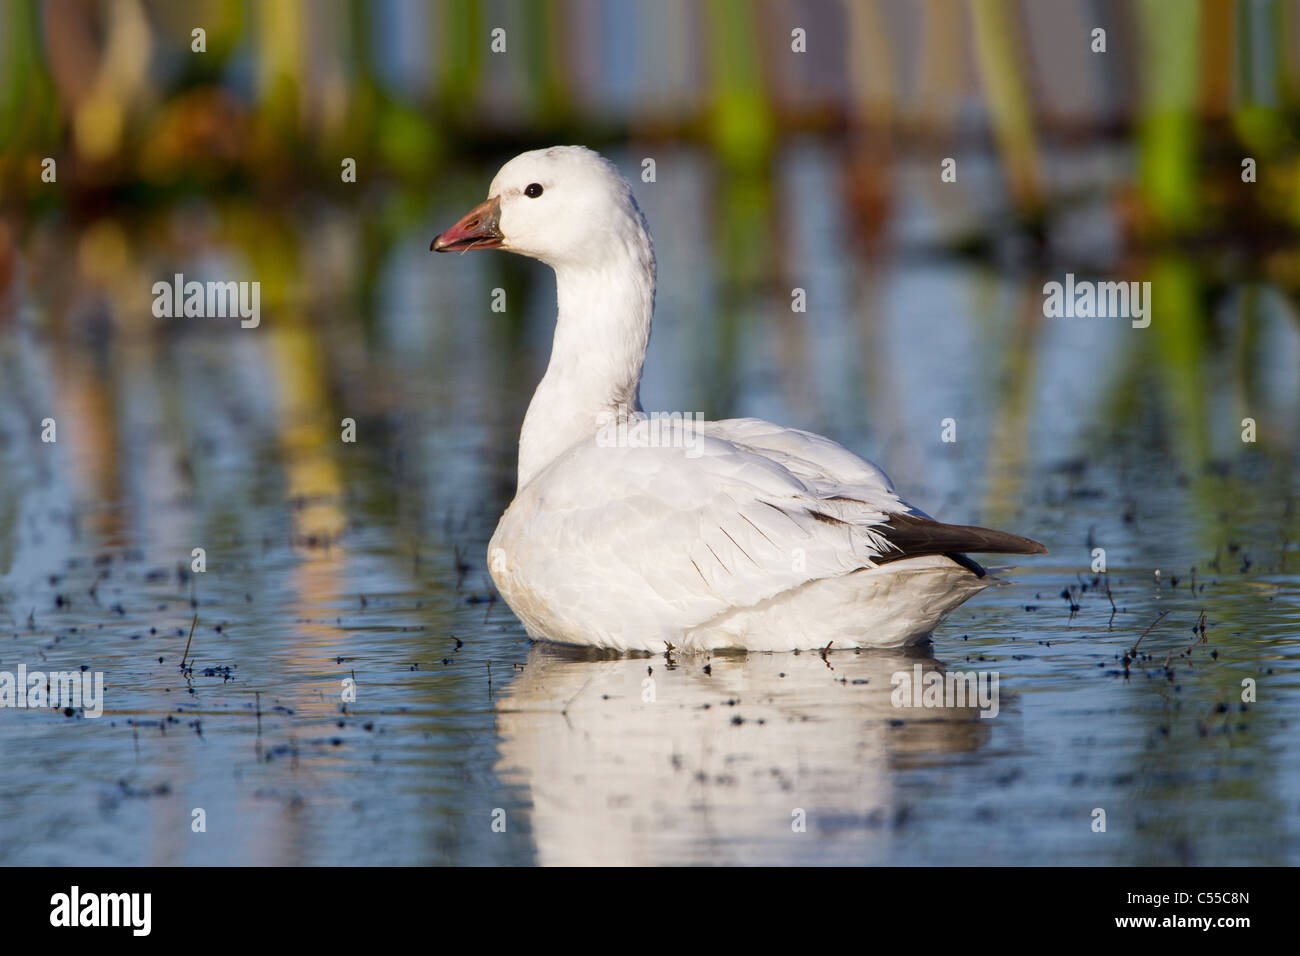 Ross's Goose (Chen rossii) white adult swimming in water Stock Photo